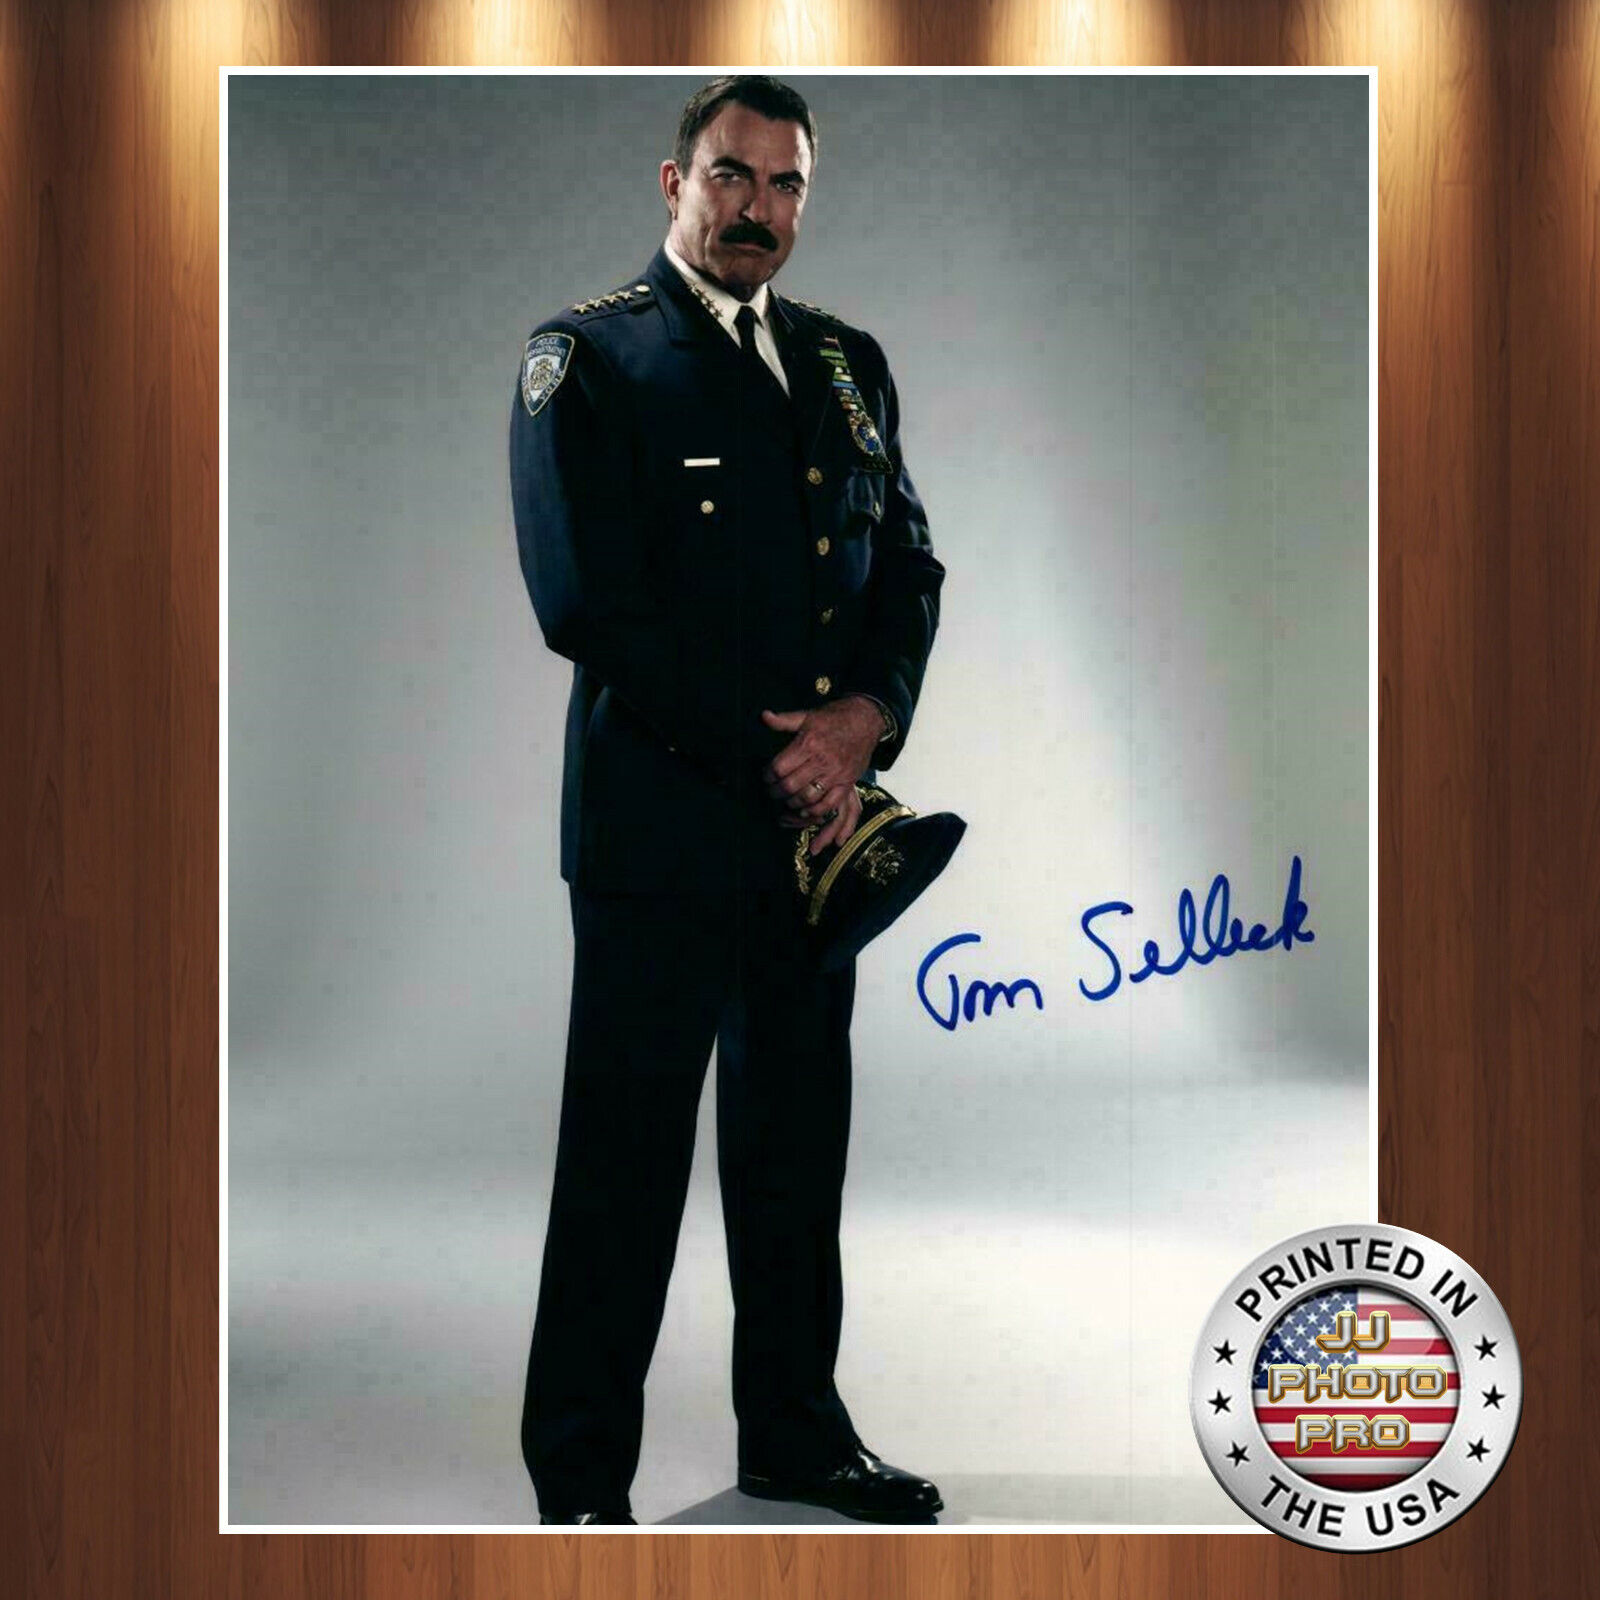 Tom Selleck Autographed Signed 8x10 Photo (Blue Bloods) REPRINT